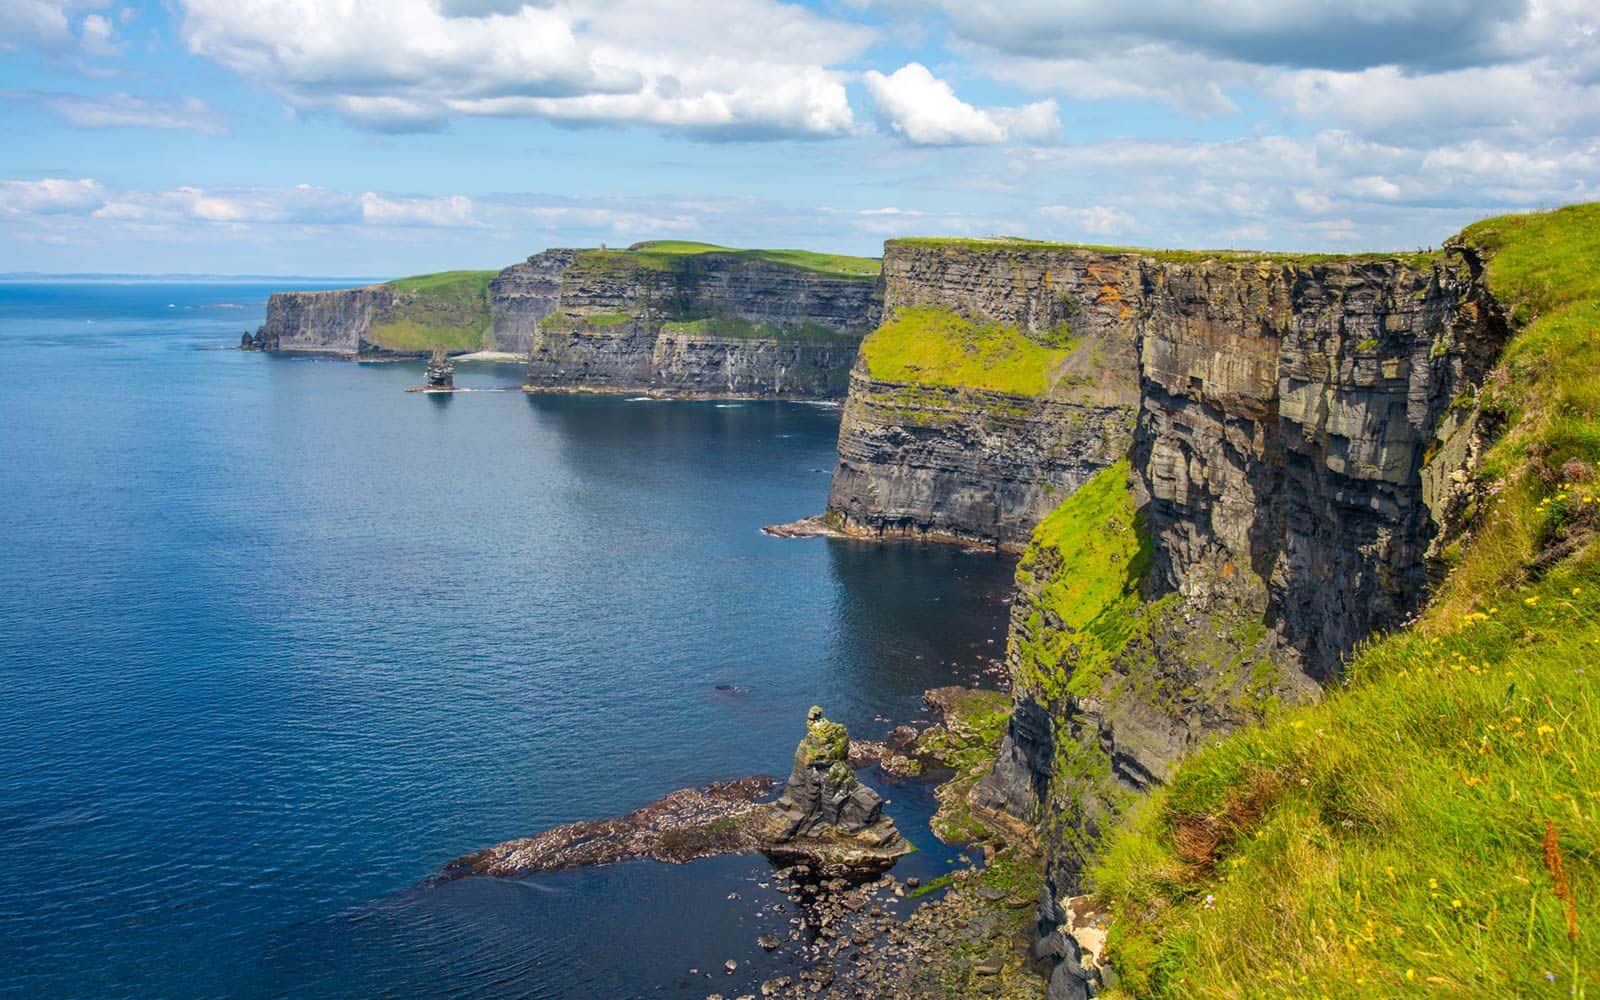 A photo of the Cliffs of Moher.